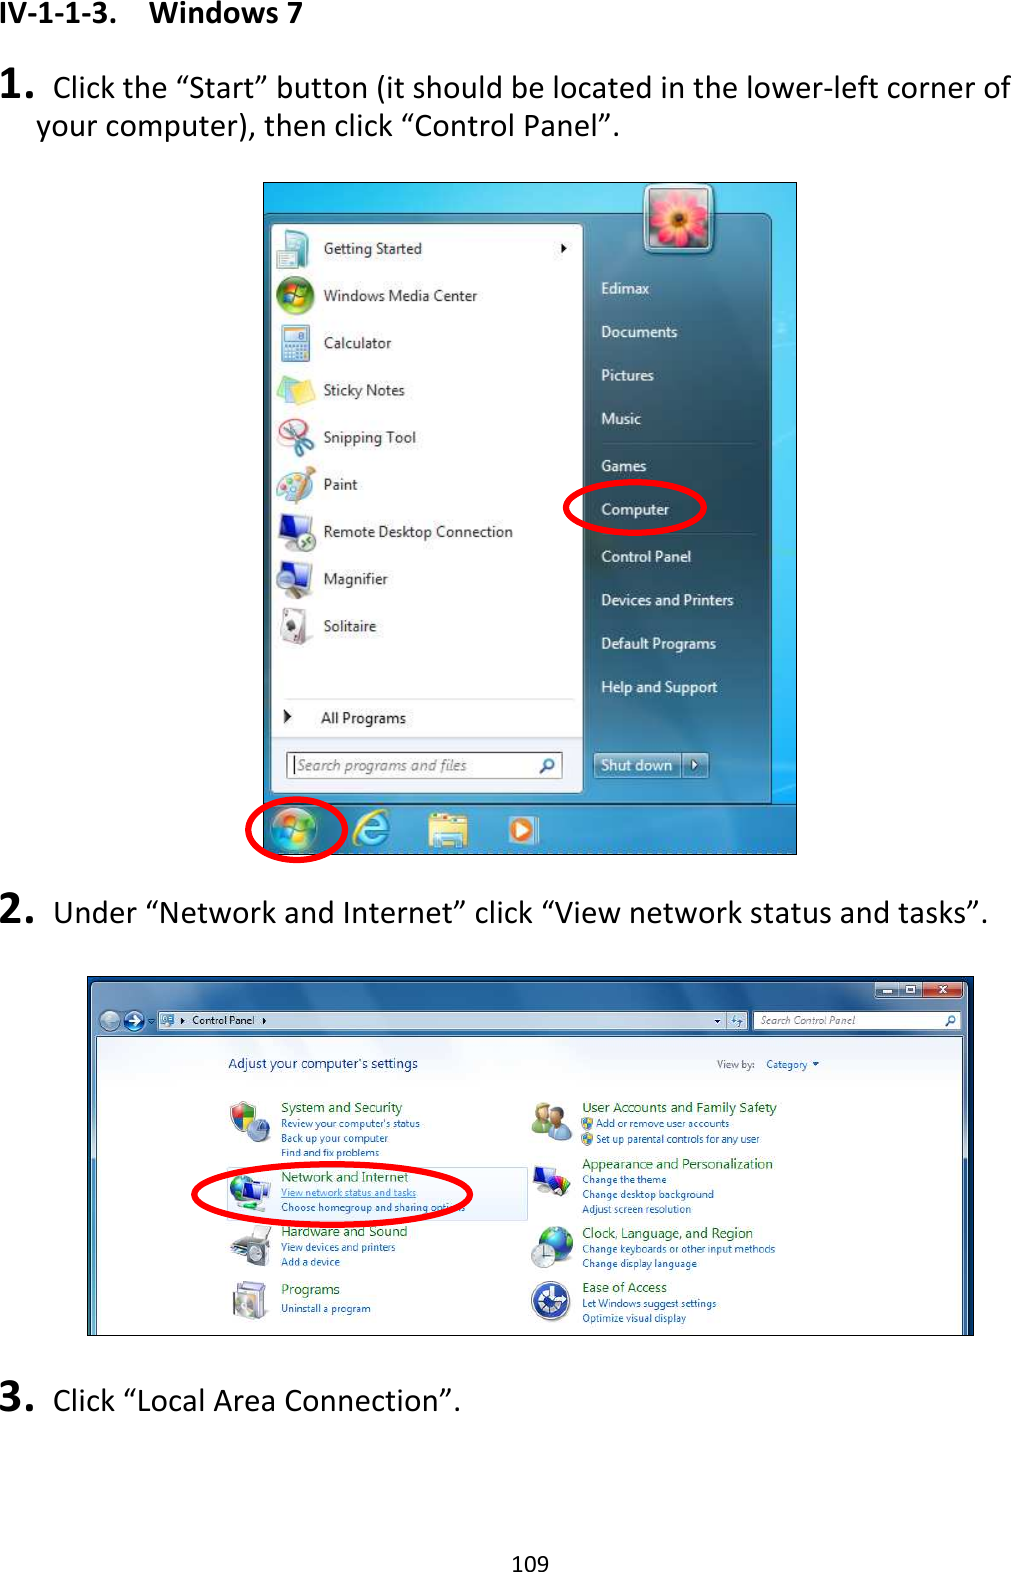 109 IV-1-1-3.  Windows 7  1.   Click the “Start” button (it should be located in the lower-left corner of your computer), then click “Control Panel”.    2.   Under “Network and Internet” click “View network status and tasks”.    3.   Click “Local Area Connection”.  